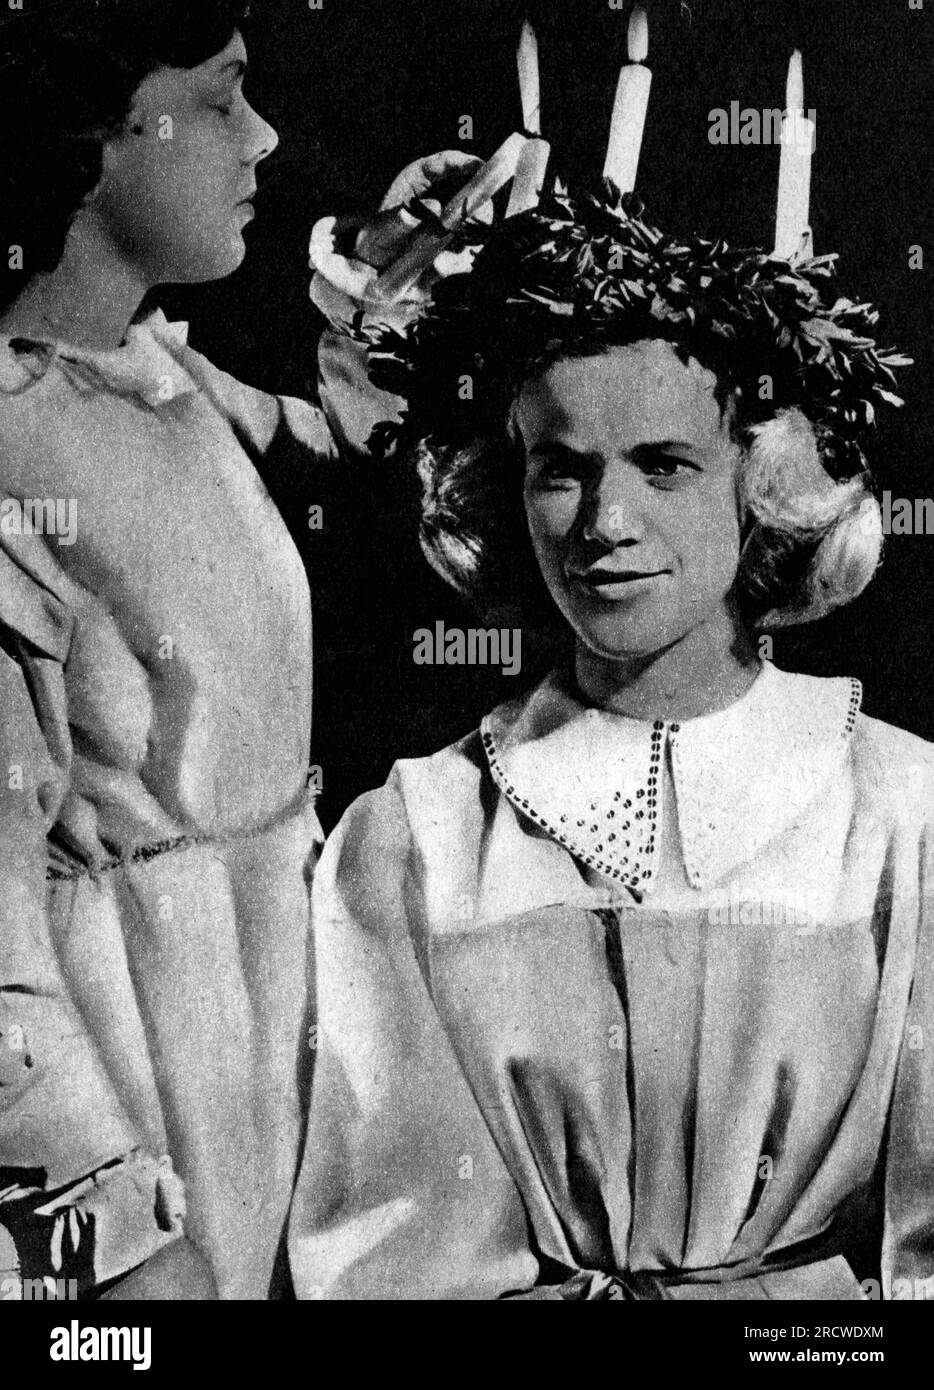 Christmas, custom, Saint Lucy's Day, Sweden, 1950s, ADDITIONAL-RIGHTS-CLEARANCE-INFO-NOT-AVAILABLE Stock Photo